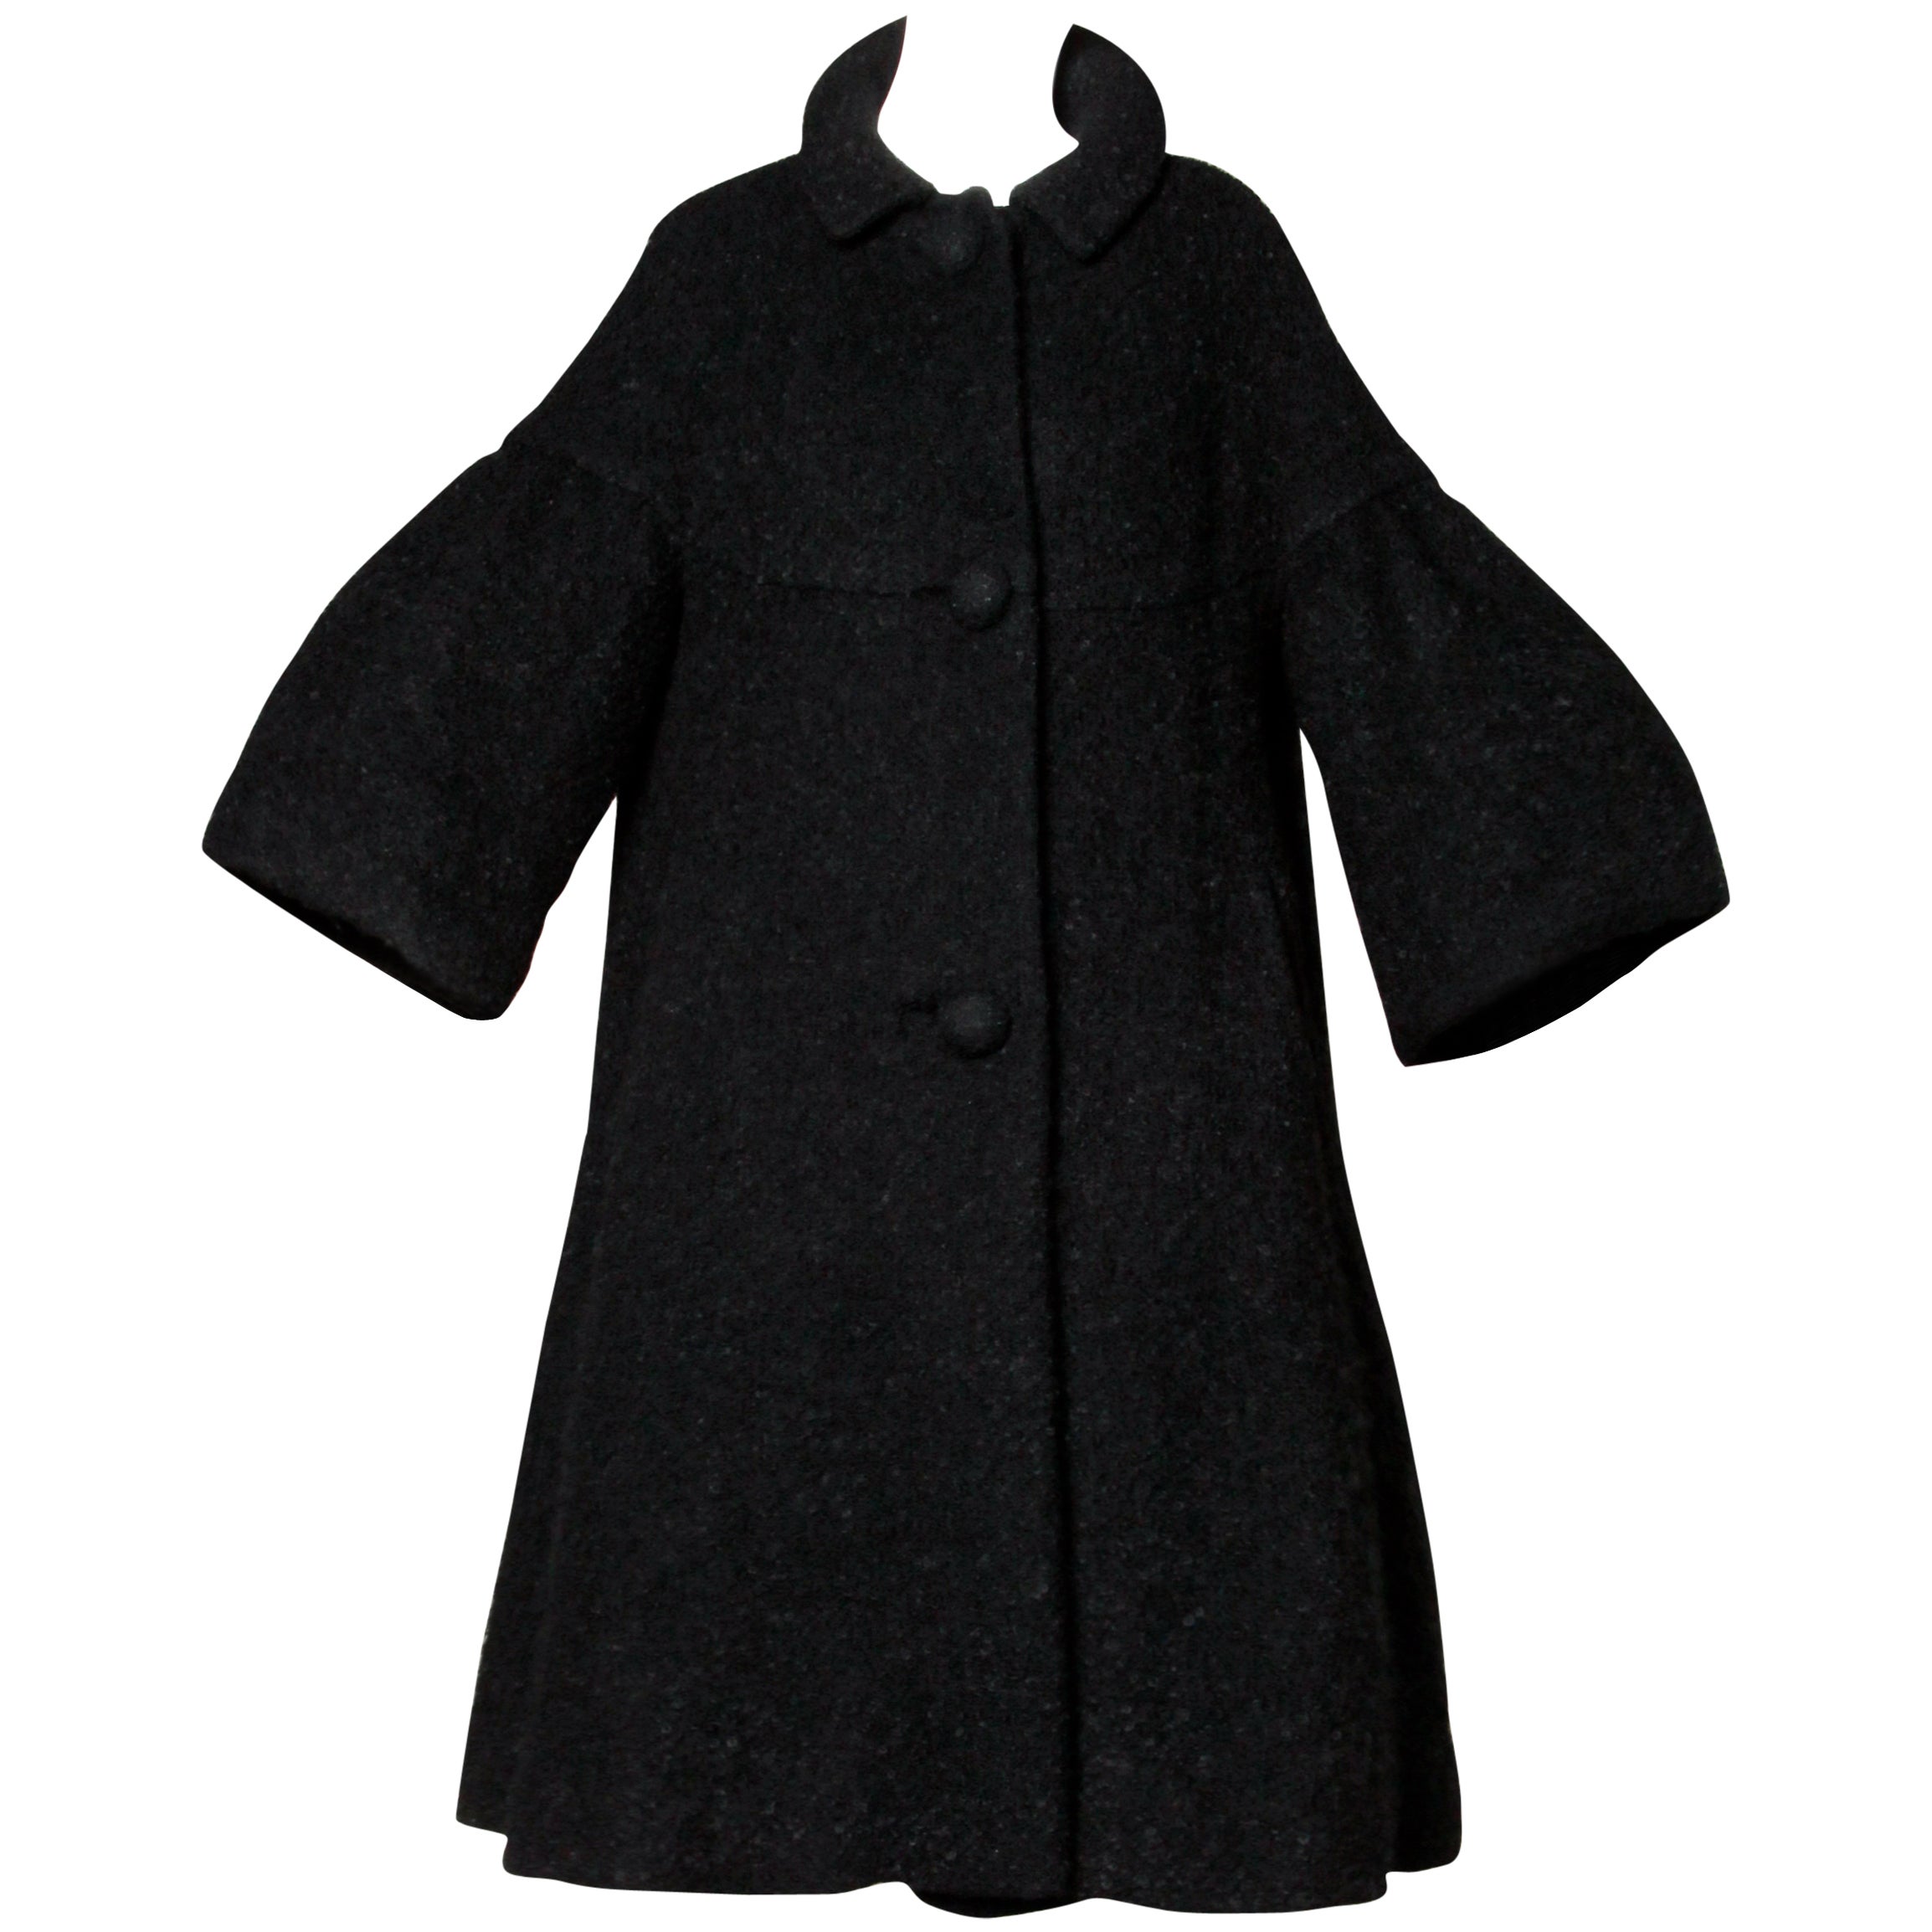 Vintage Black Boucle Box Coat with Mink Collar estimated size Small 36 bust